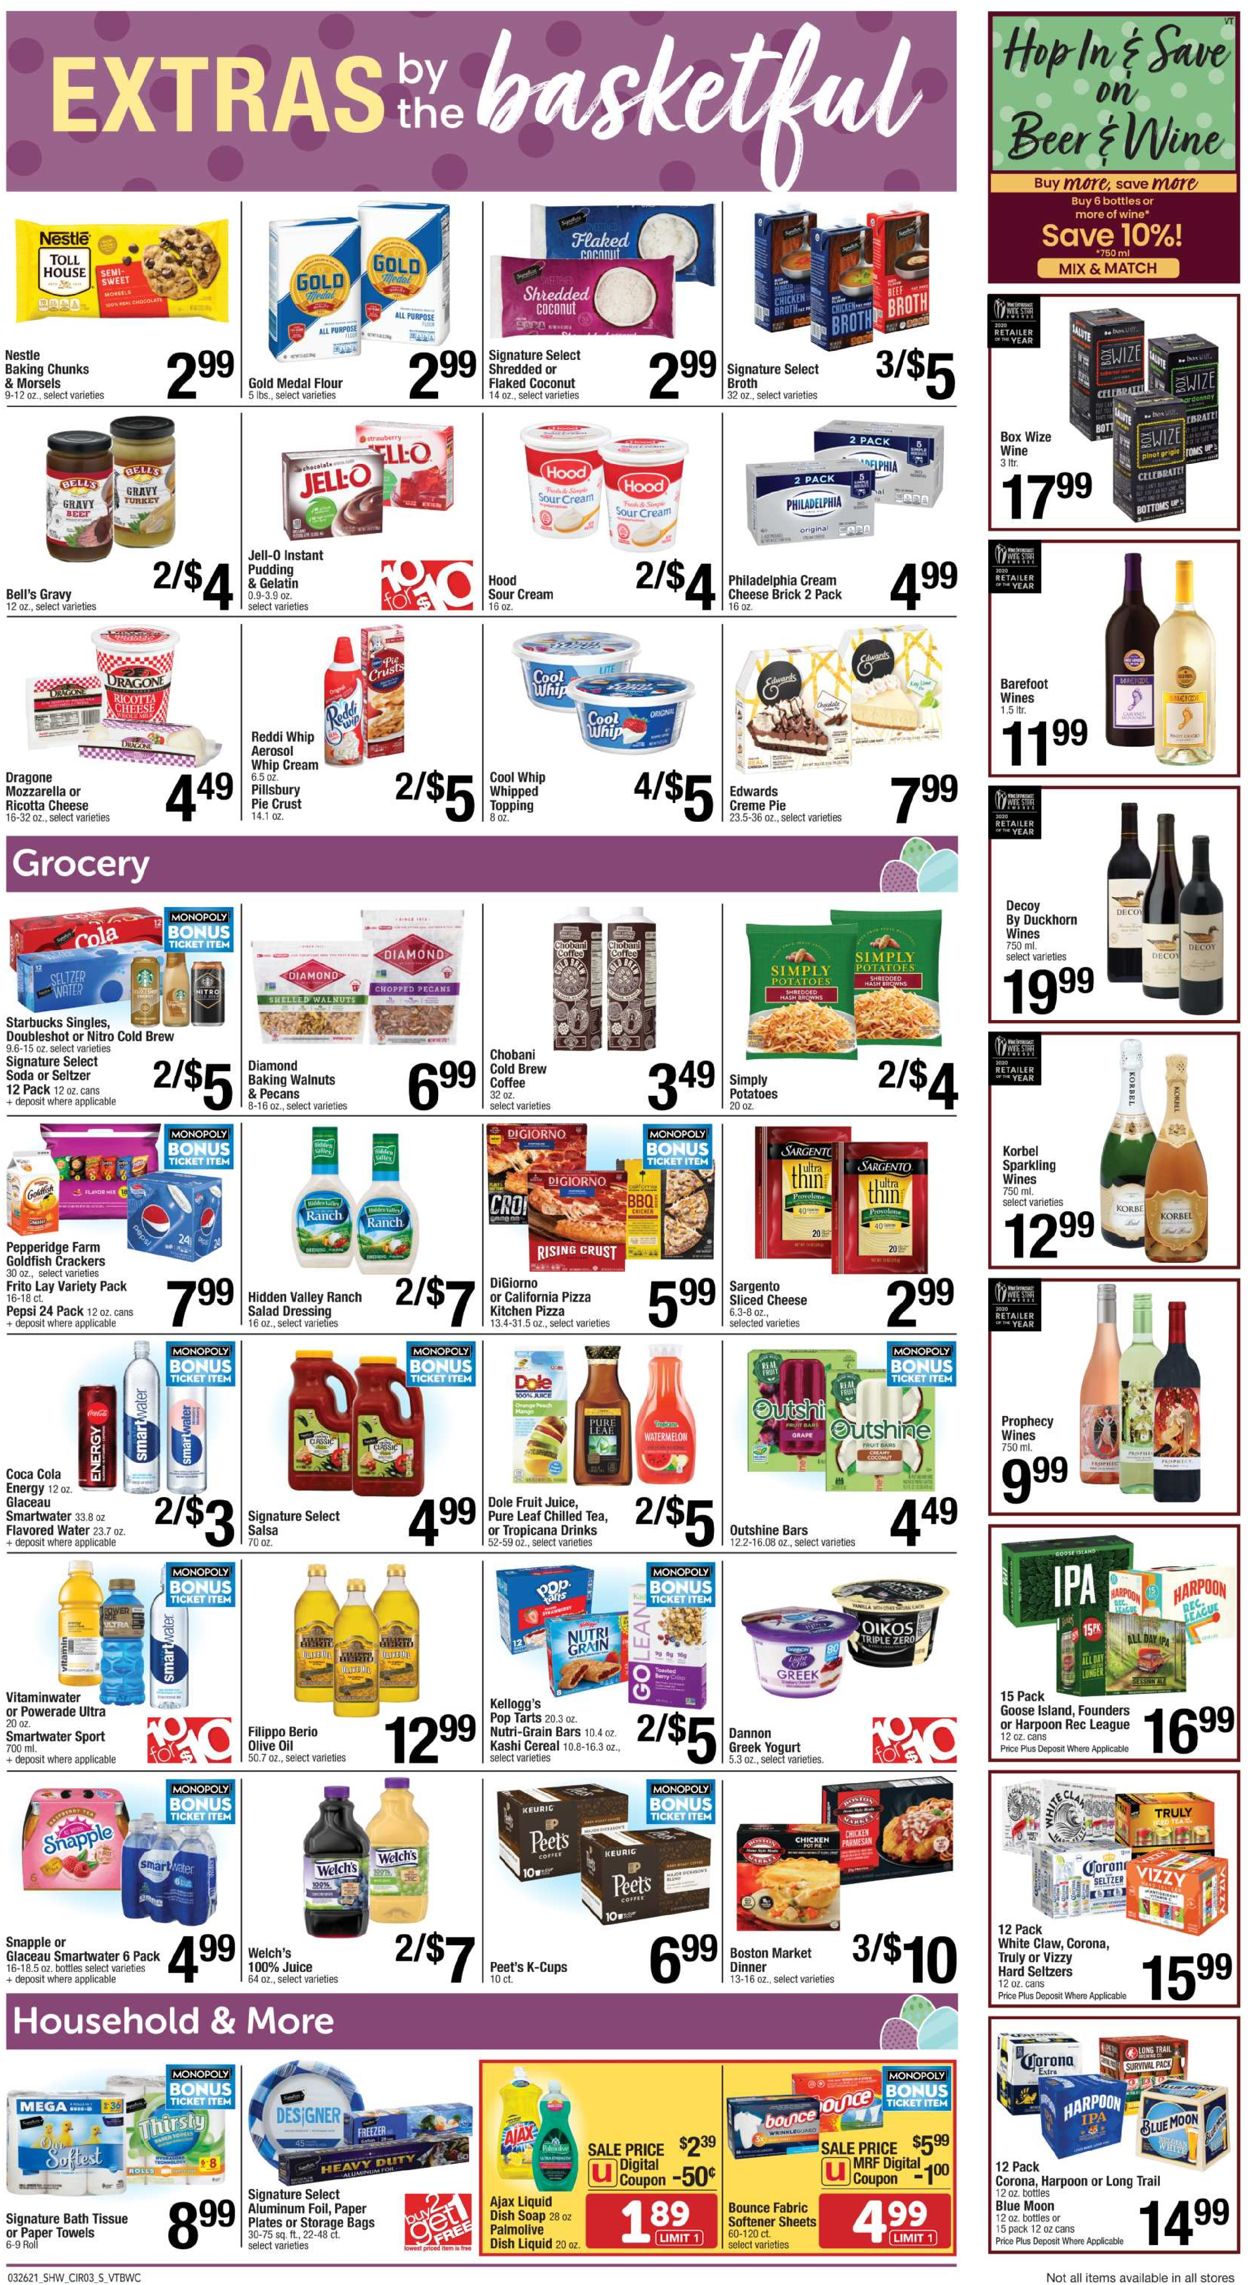 Catalogue Shaw’s - Easter 2021 Ad from 03/26/2021